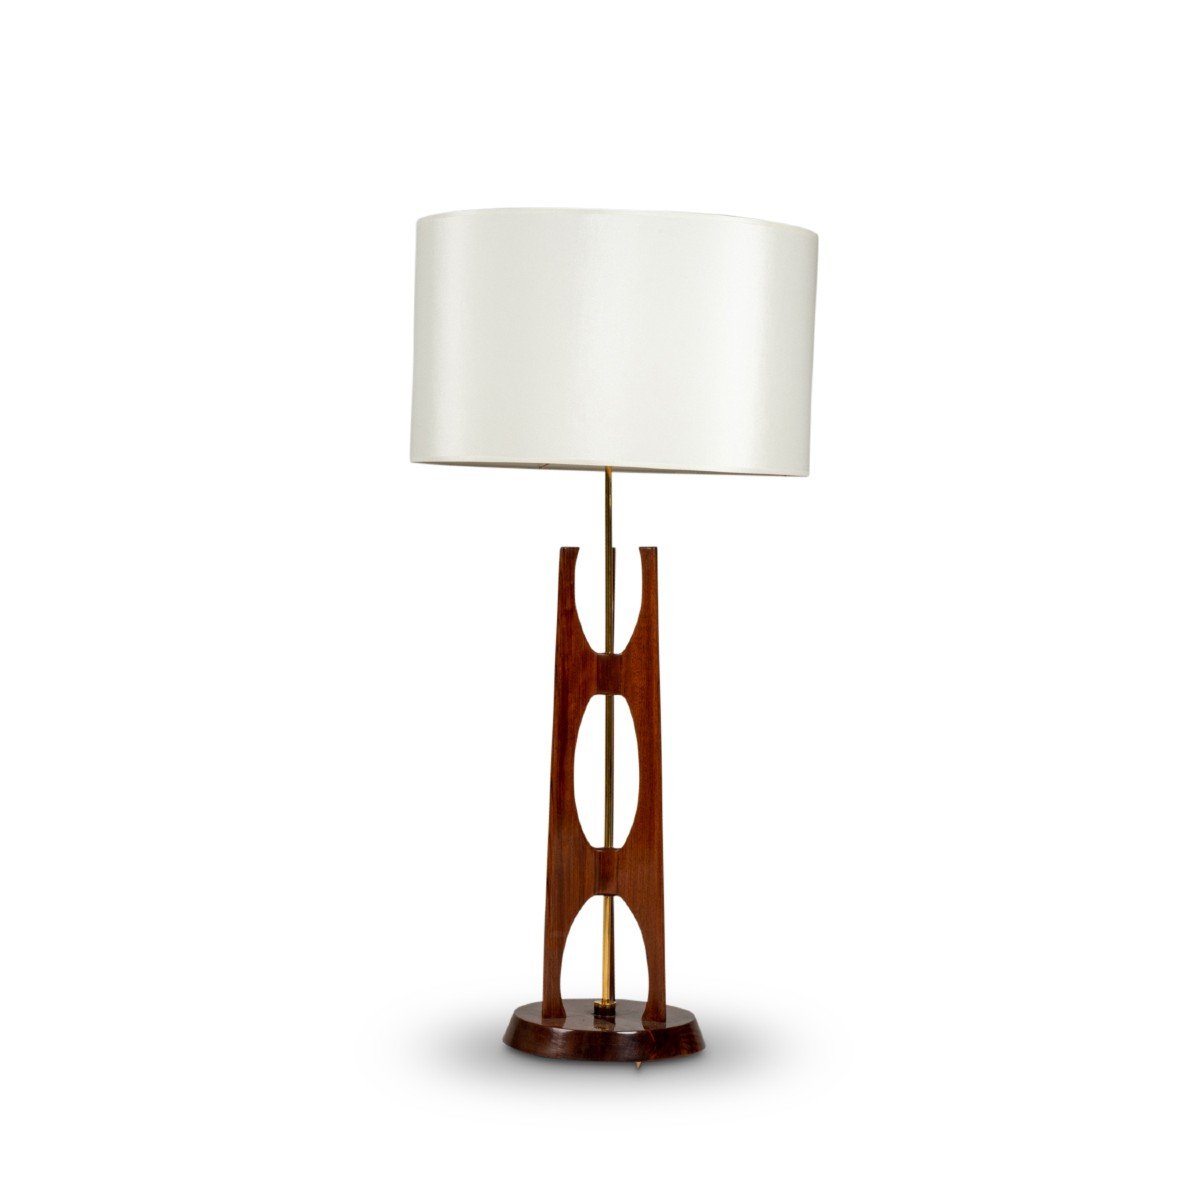 Lamp In Teak And Brass, 1960s, Ls5711256b